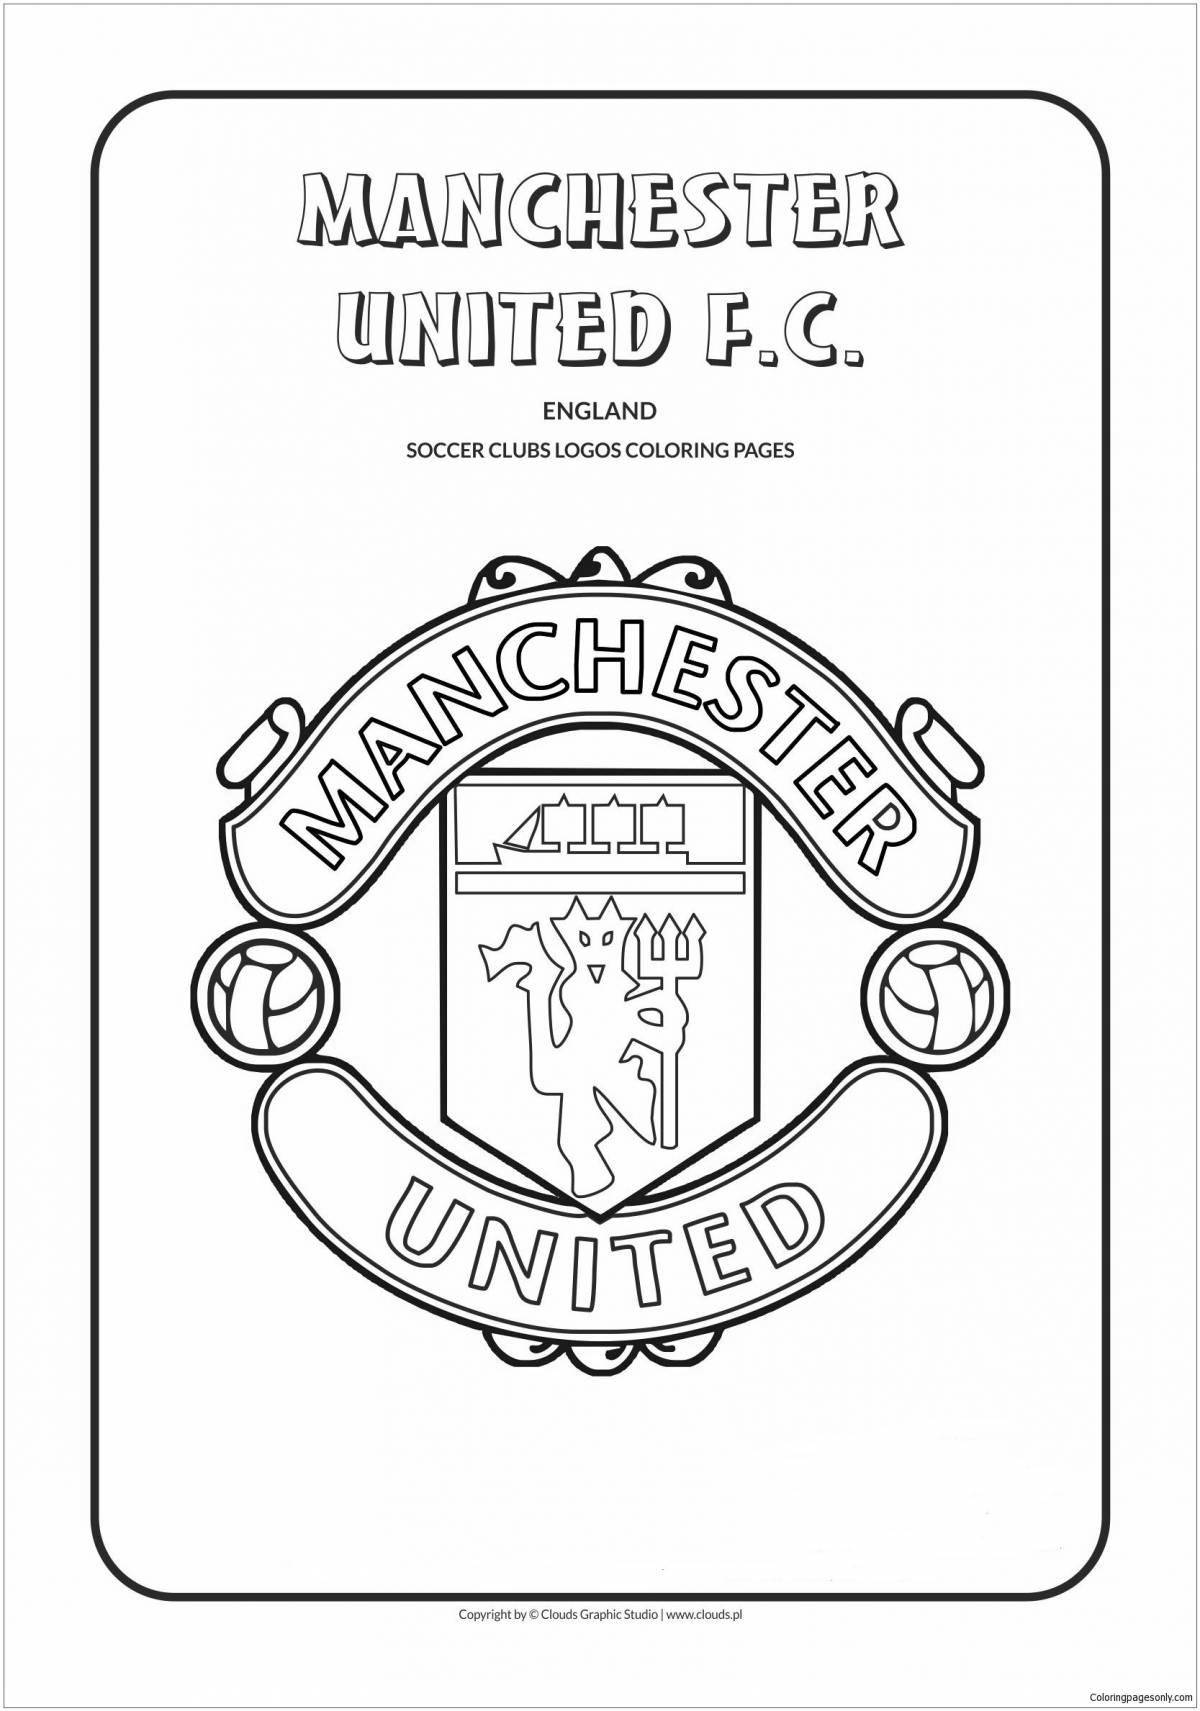 Coloring book charming manchester city